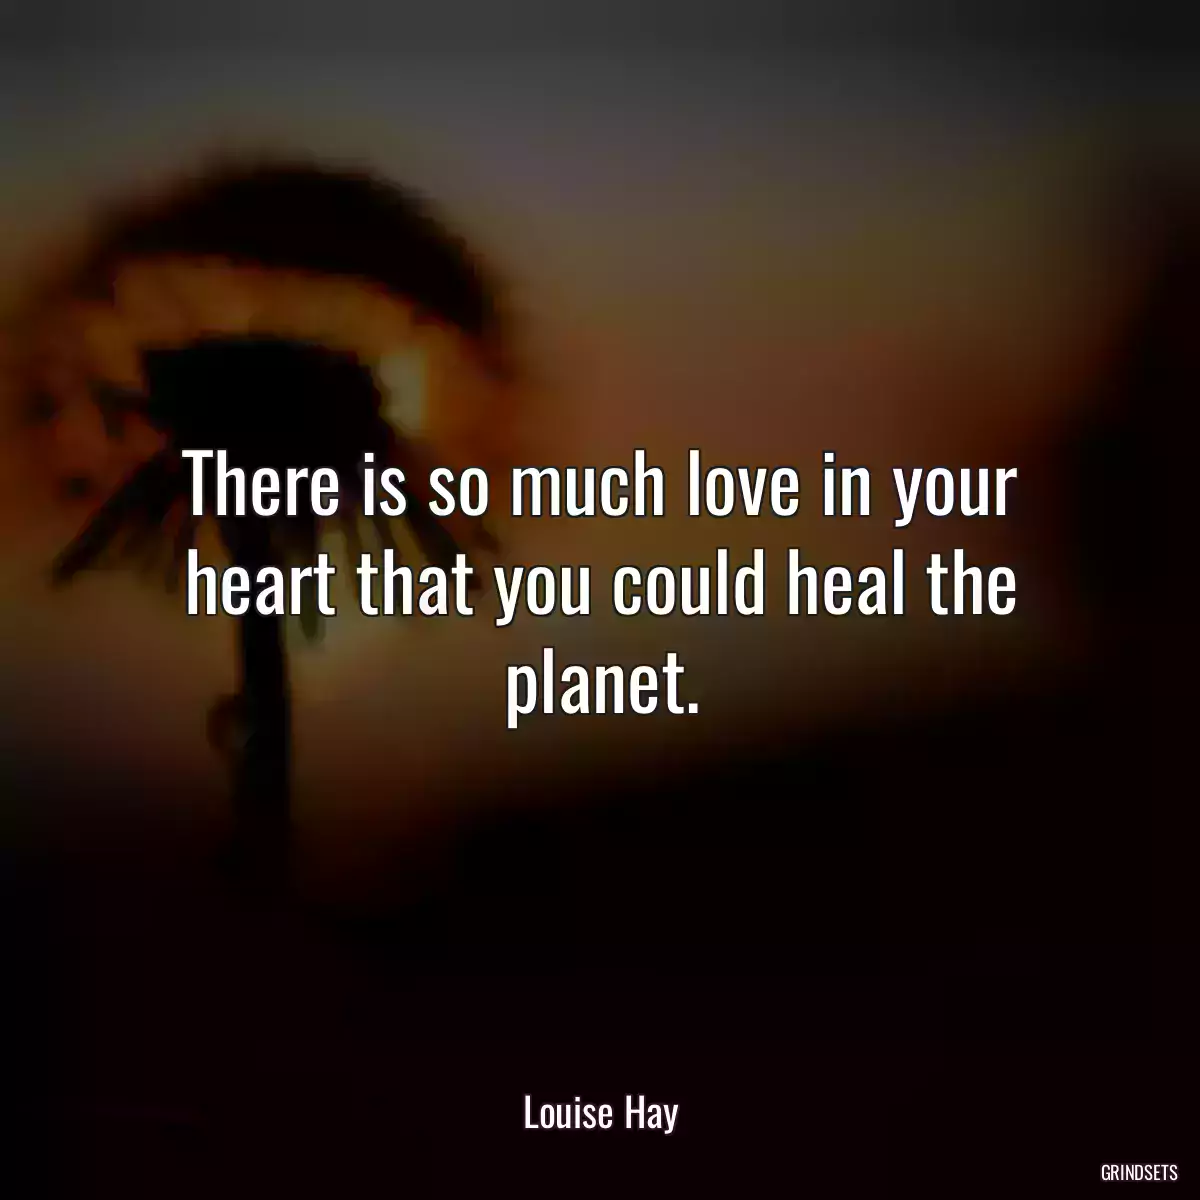 There is so much love in your heart that you could heal the planet.